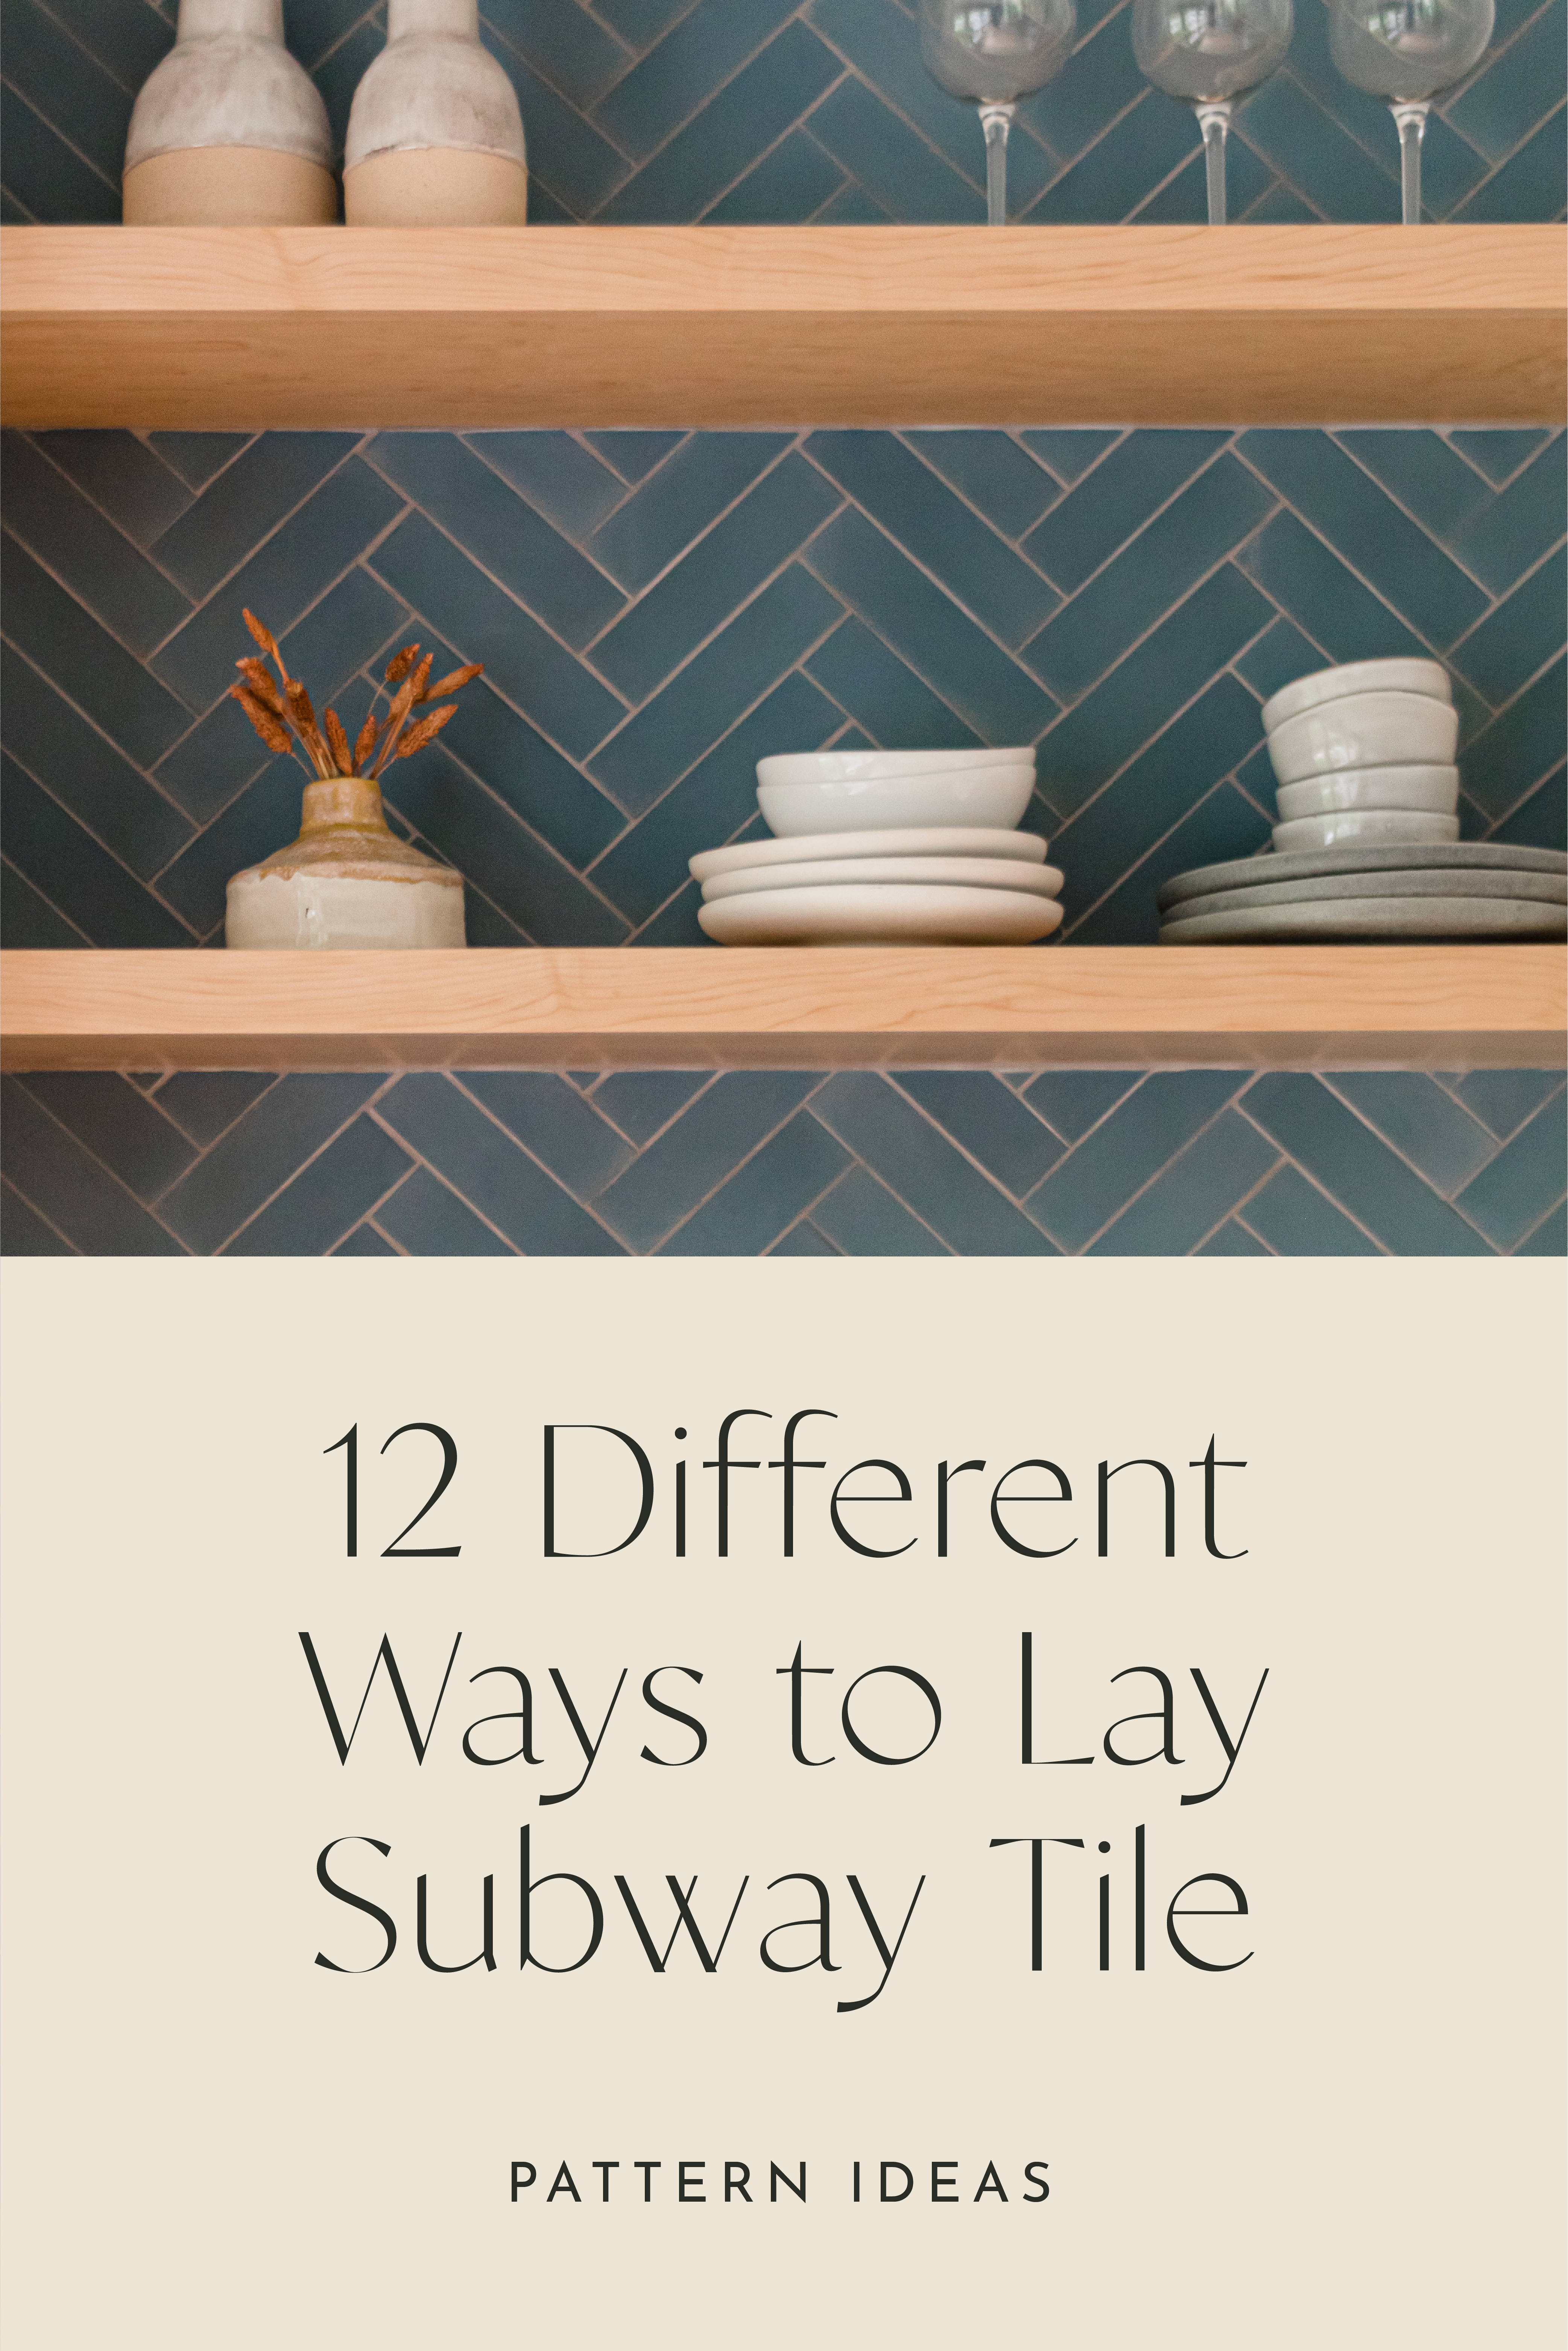 12 Different Subway Tile Patterns & How to Lay Them 3